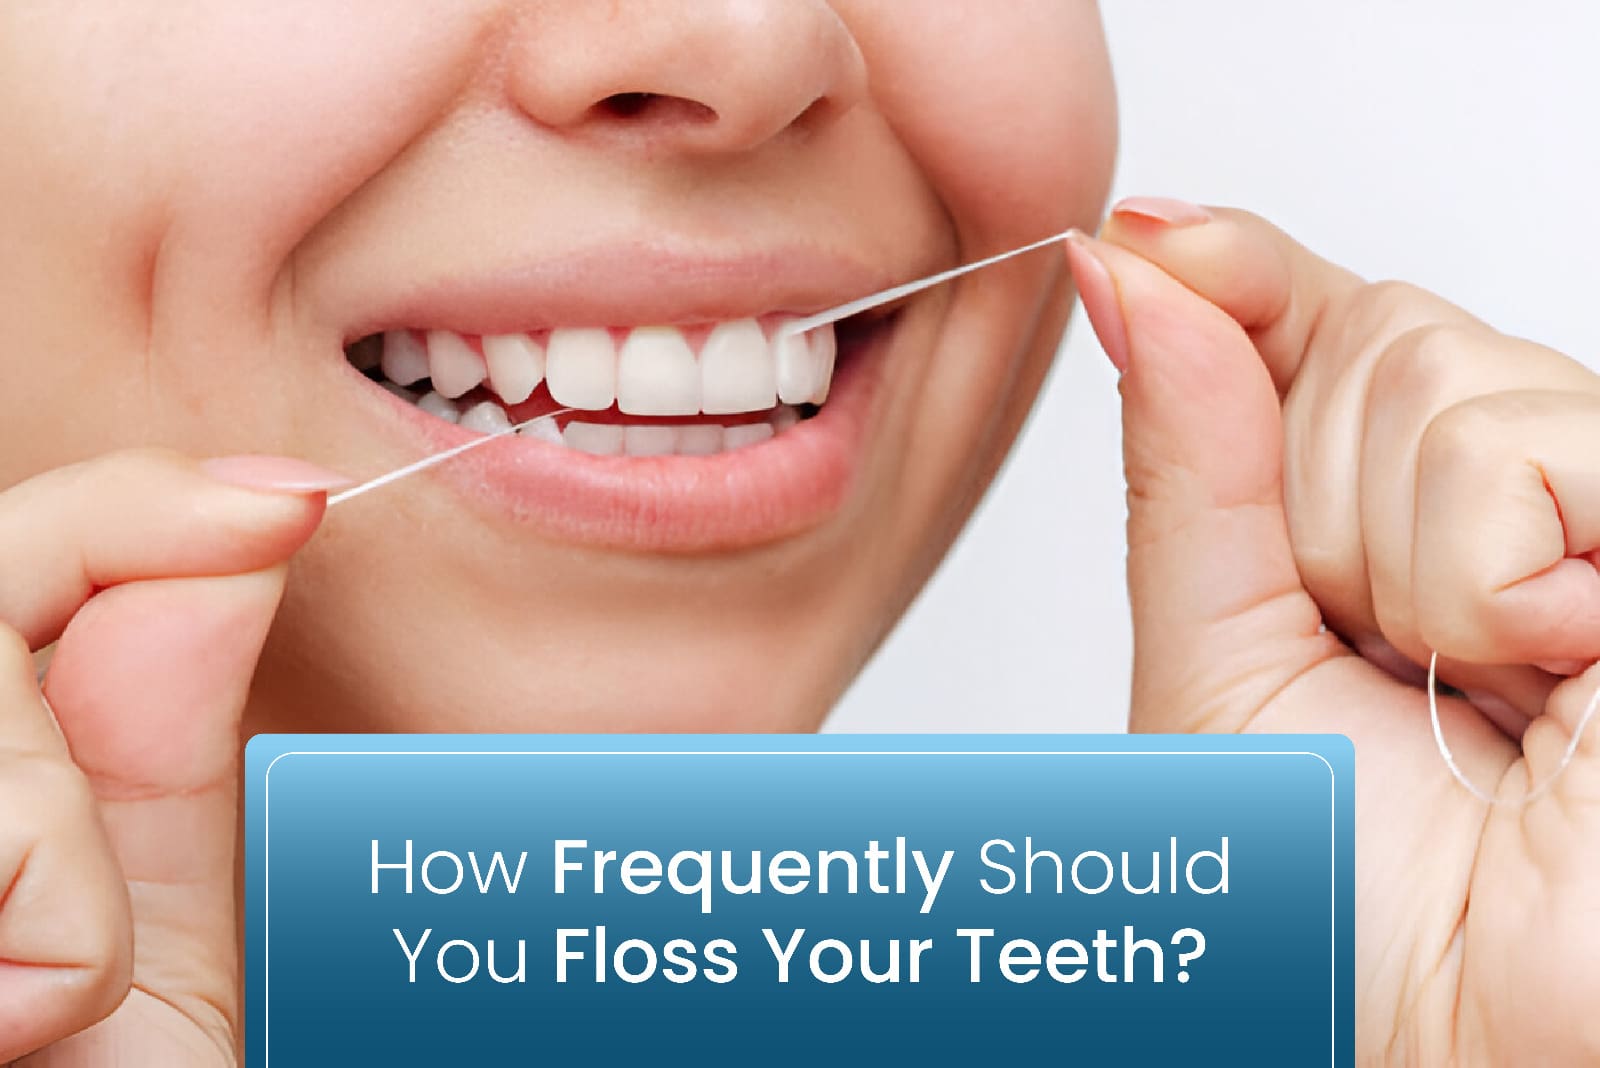 How Frequently Should You Floss Your Teeth?